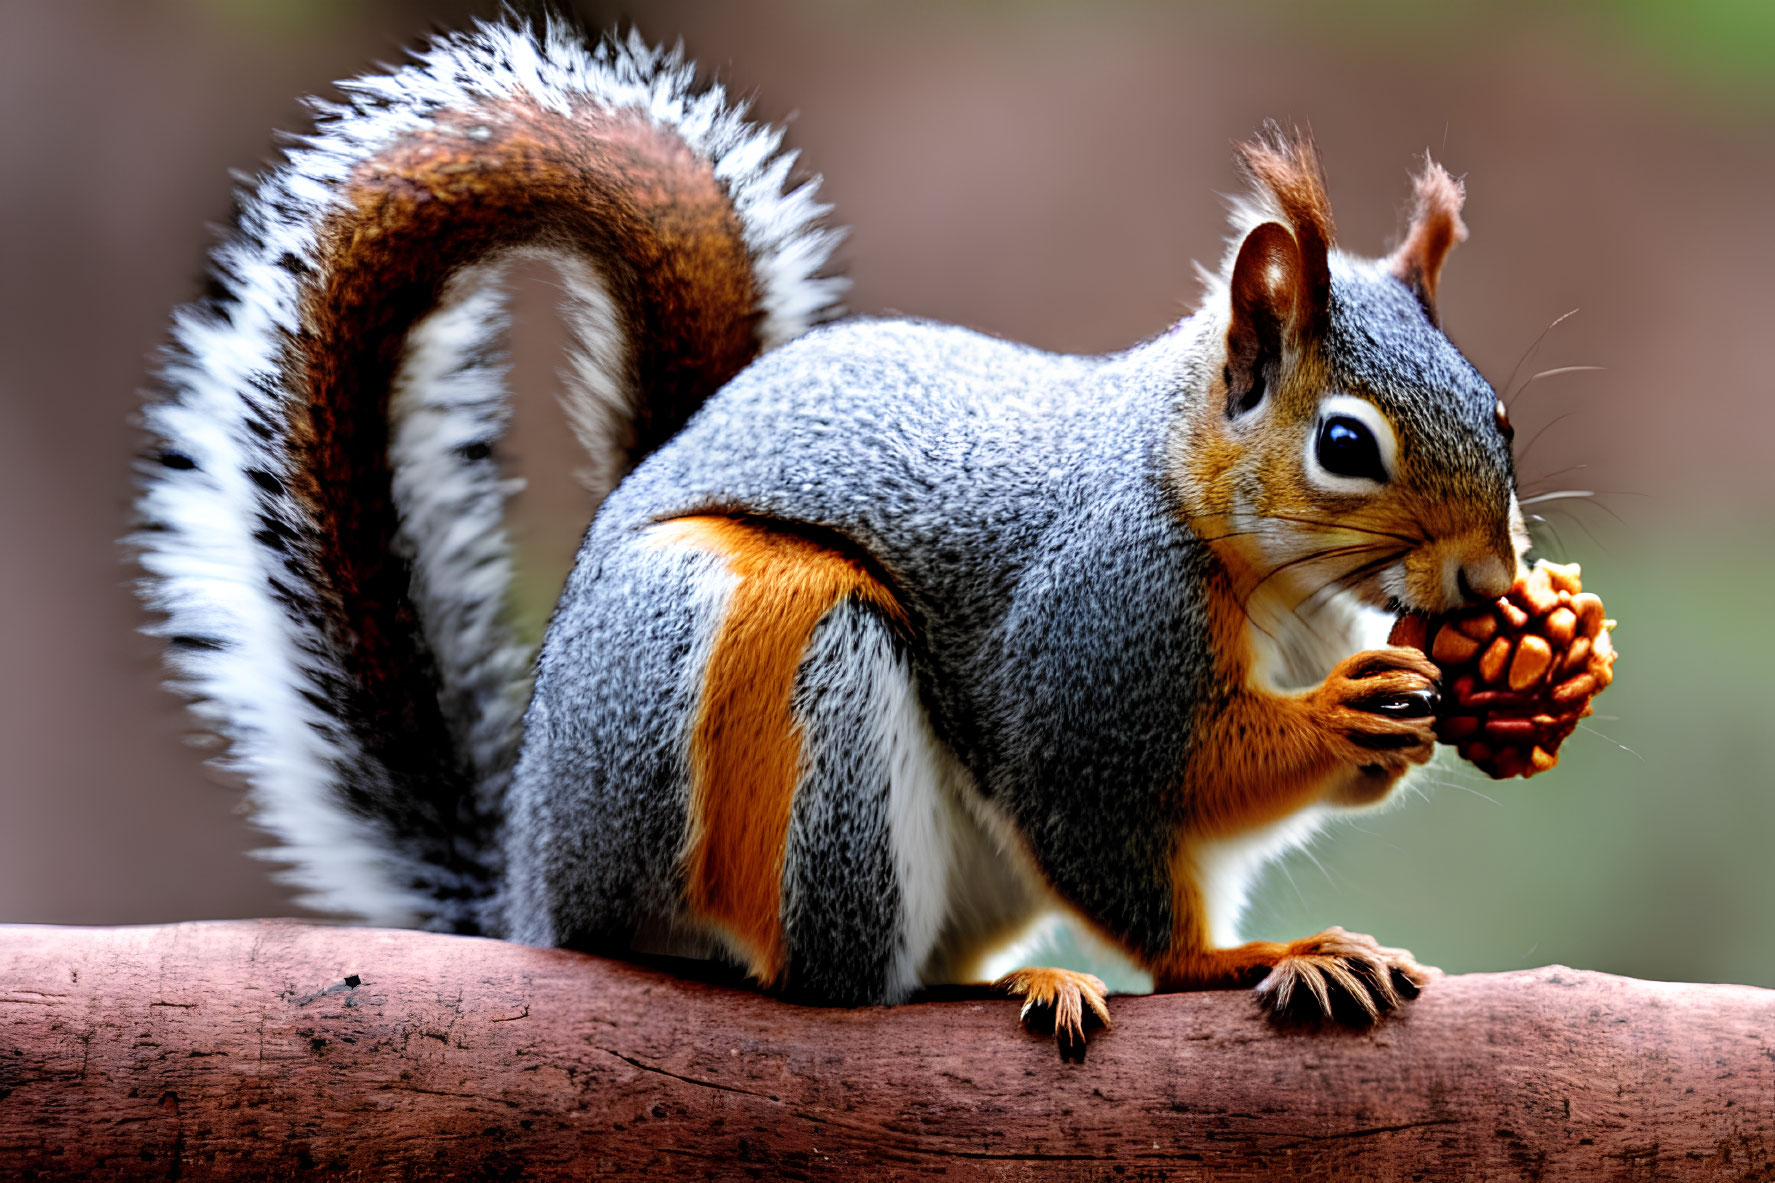 Bushy-tailed squirrel holding pine cone on wooden surface